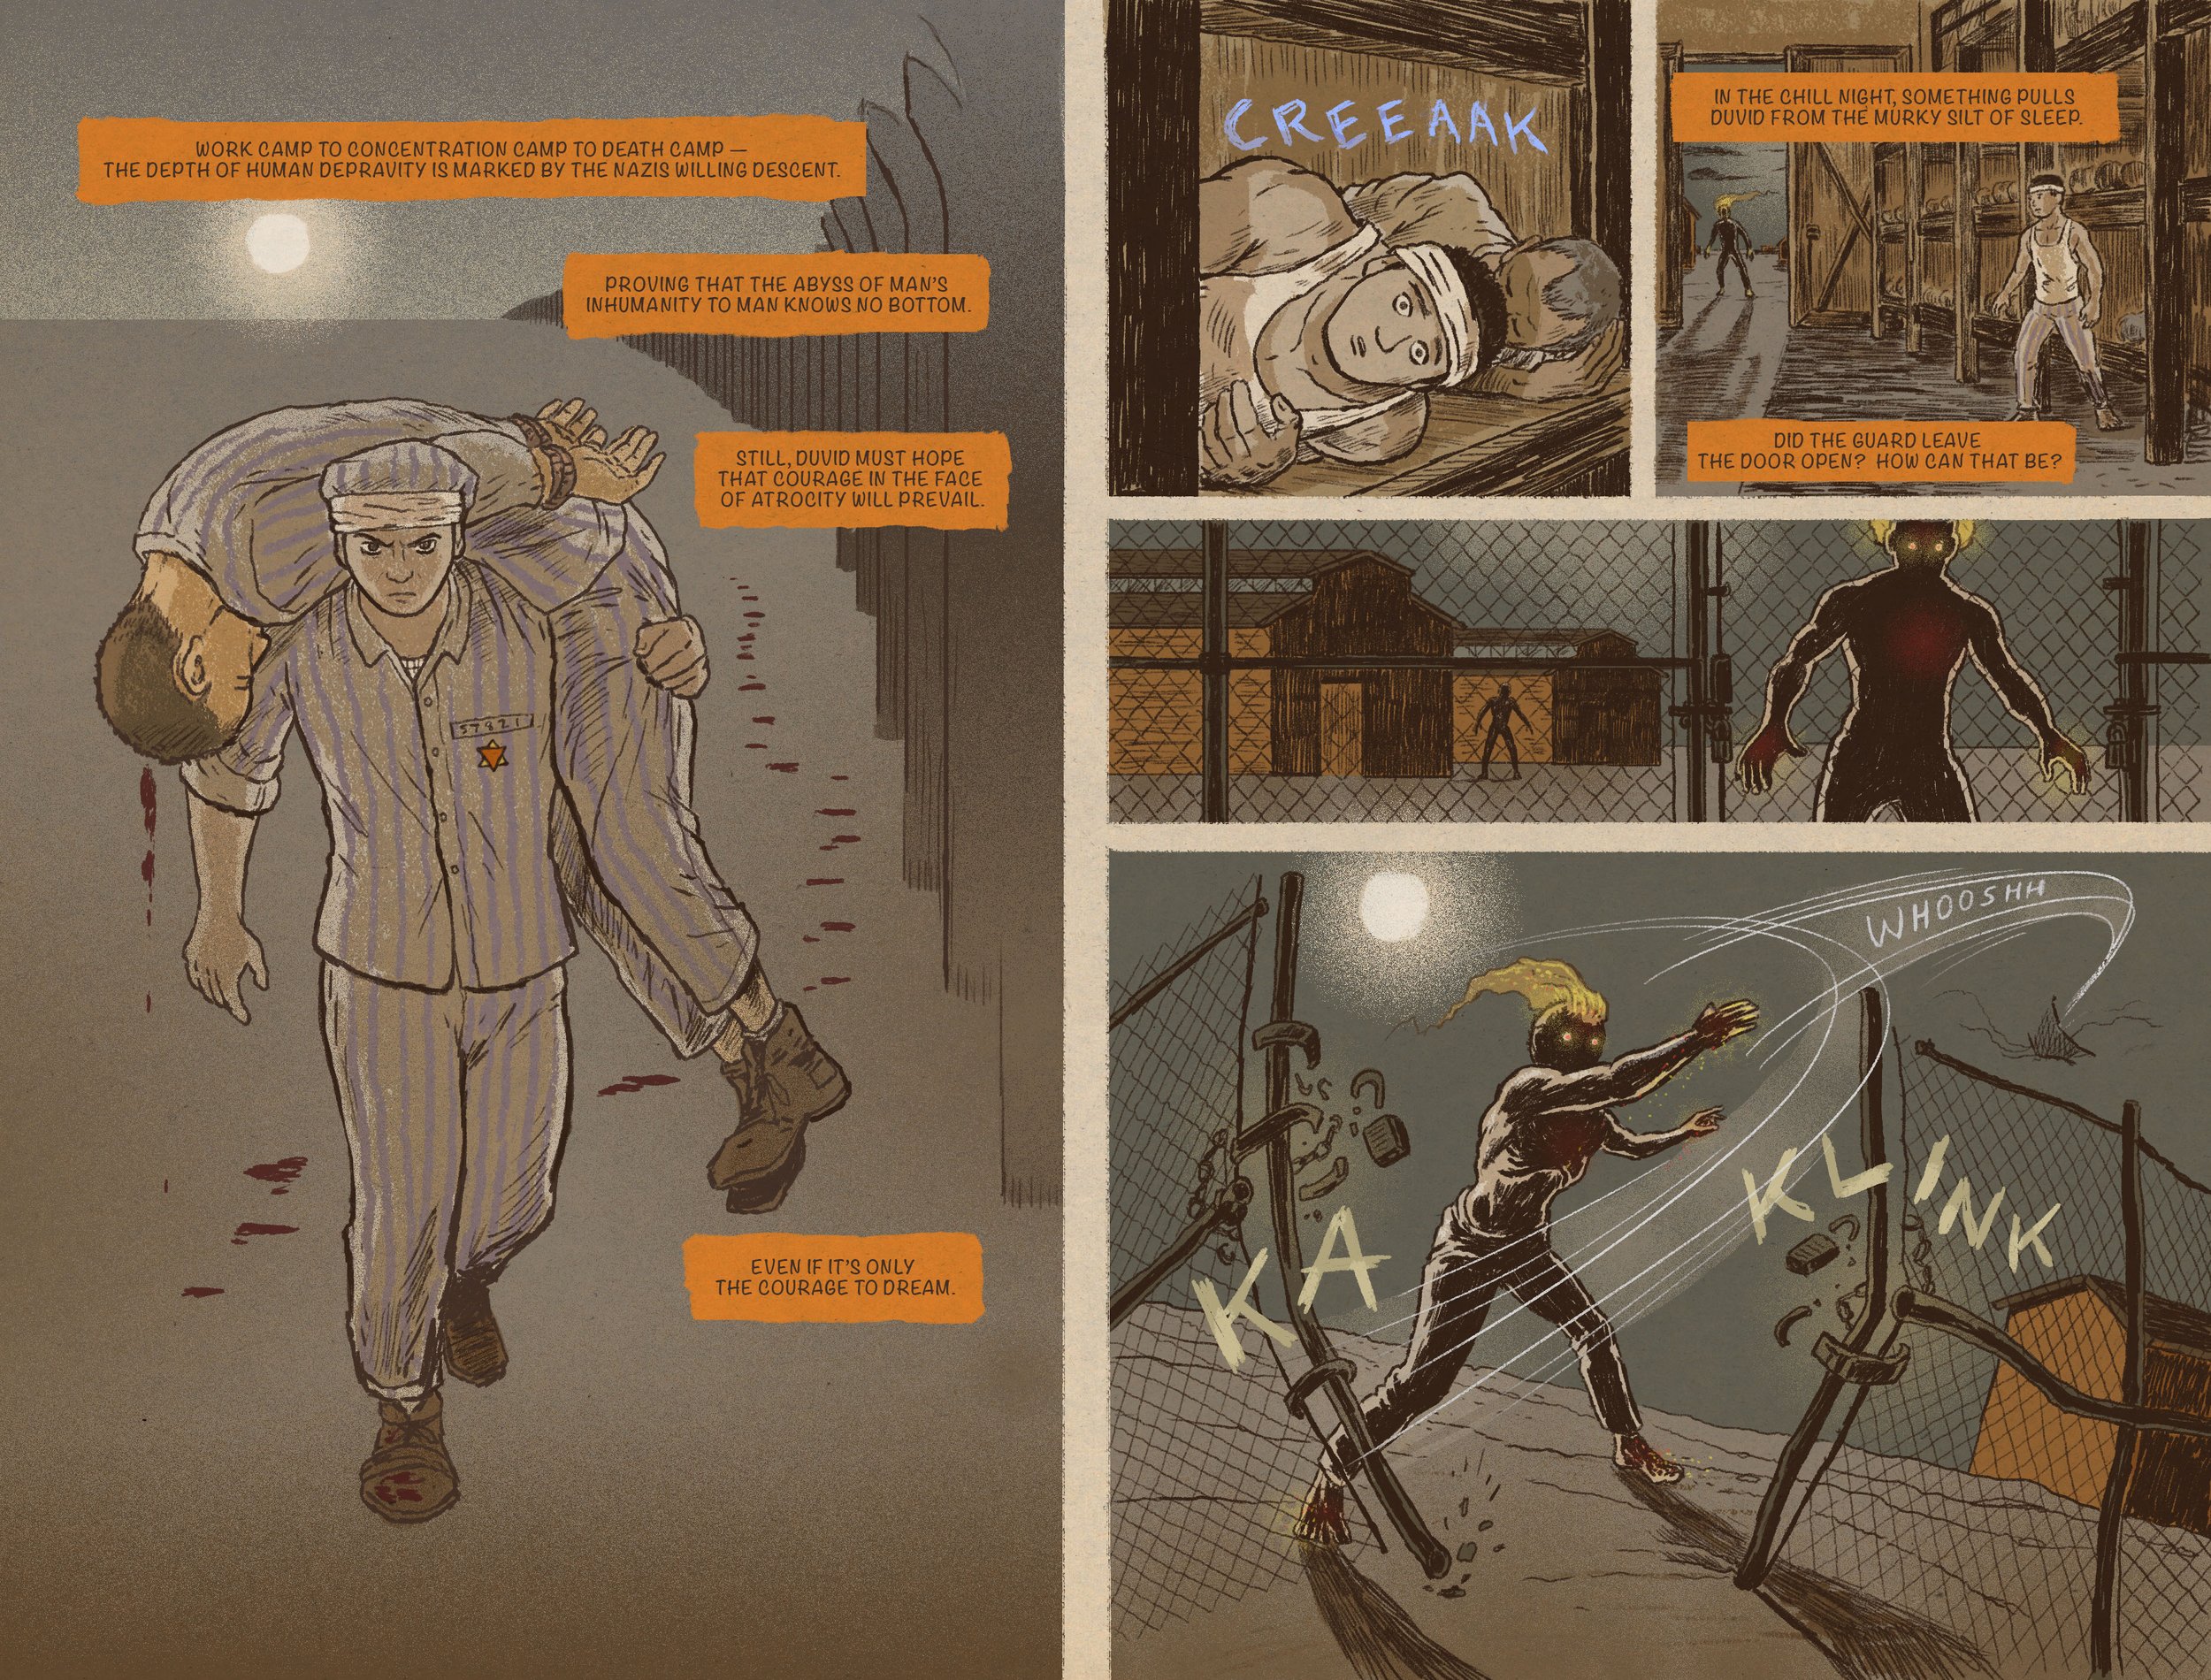 CTD-CH 2-THE GOLEM OF AUSCHWITZ-page 72-73 COLOR.jpg